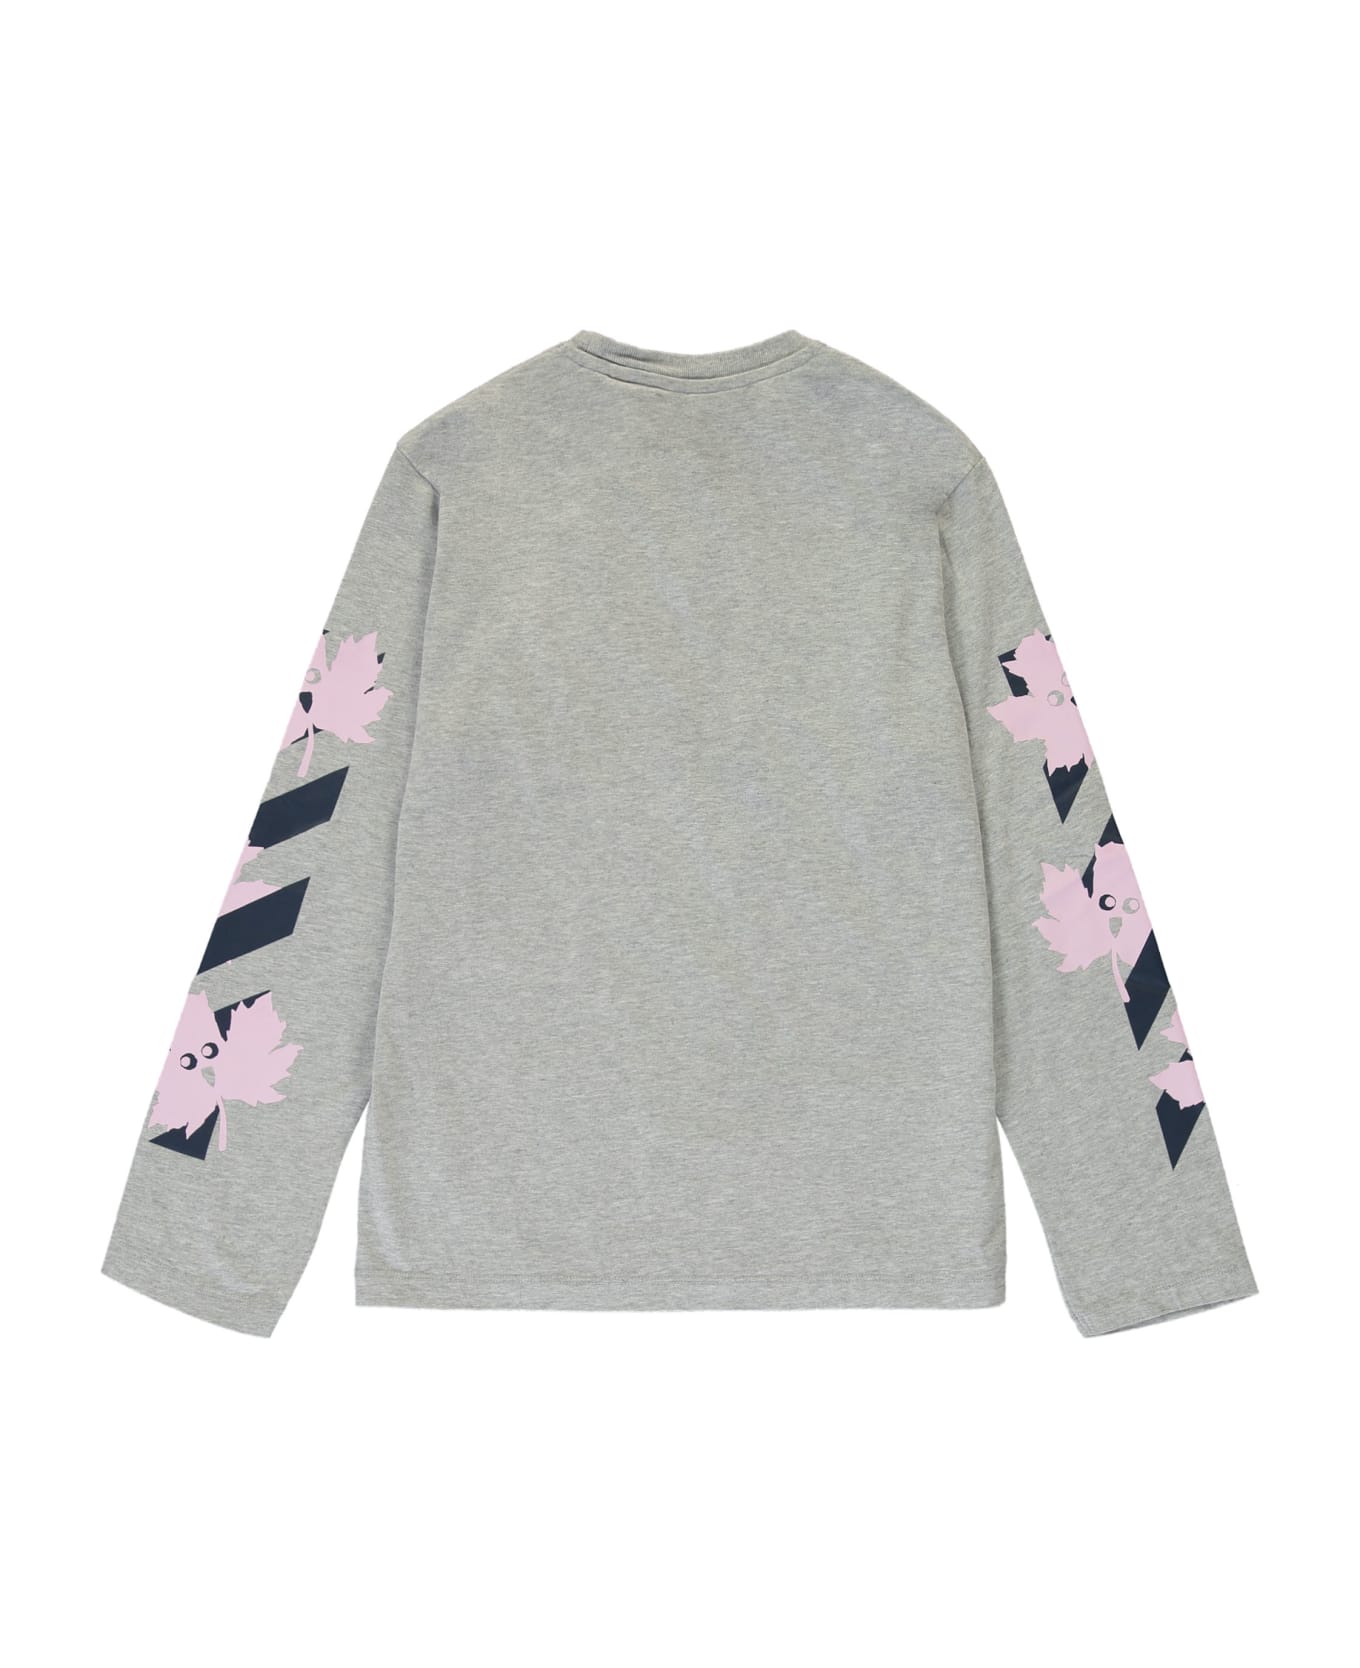 Off-White Printed Cotton T-shirt - grey